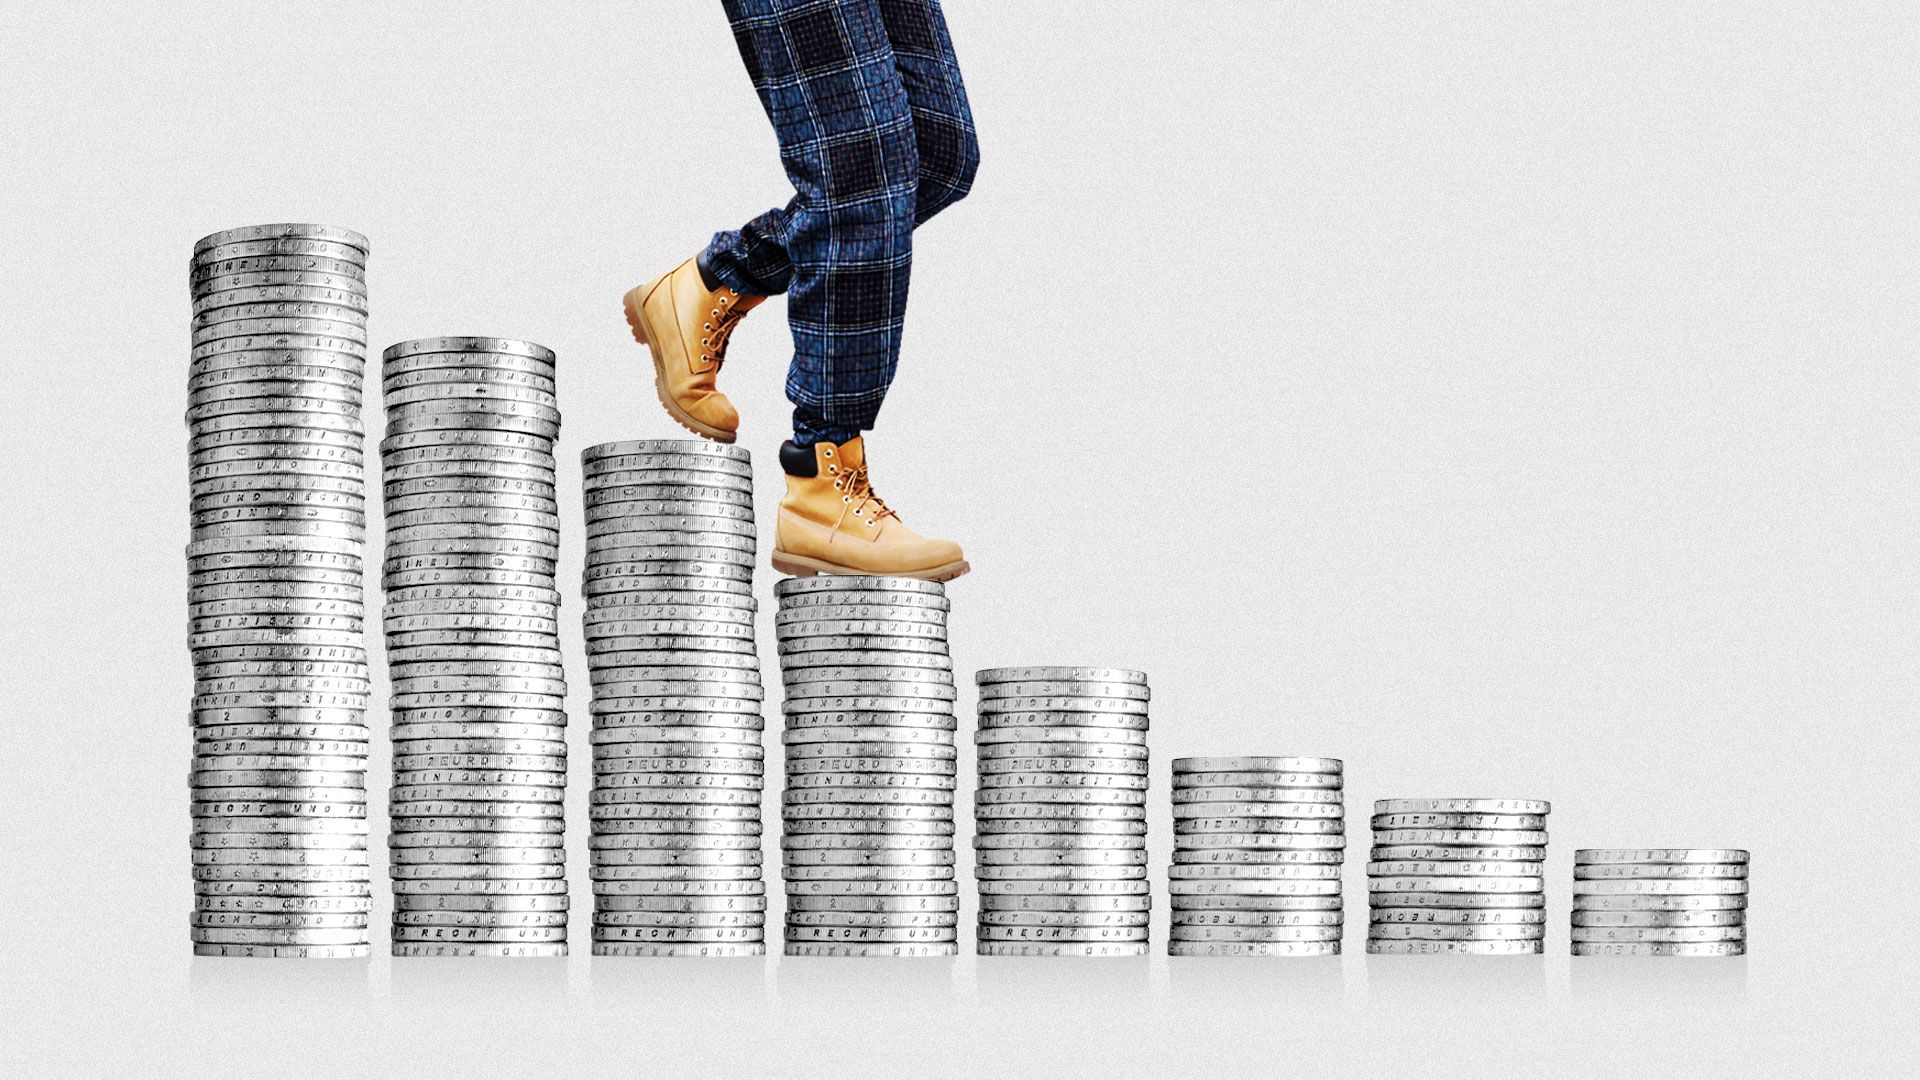 Illustration of person walking down stairs made of coins